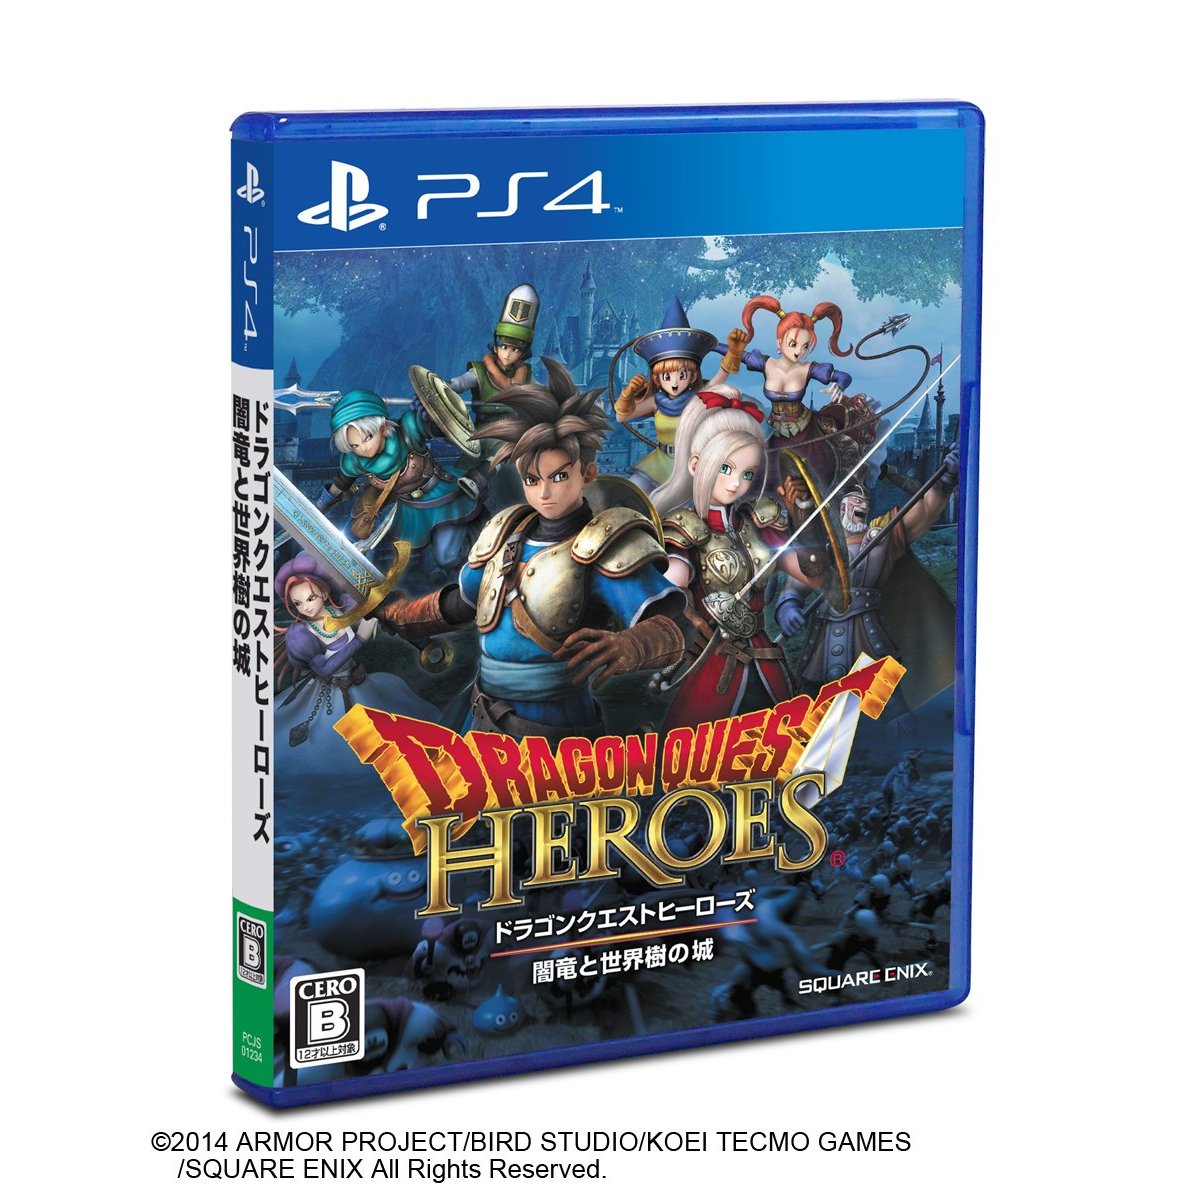 Playstation 4 News: DRAGON QUEST HEROES announced for the West ...